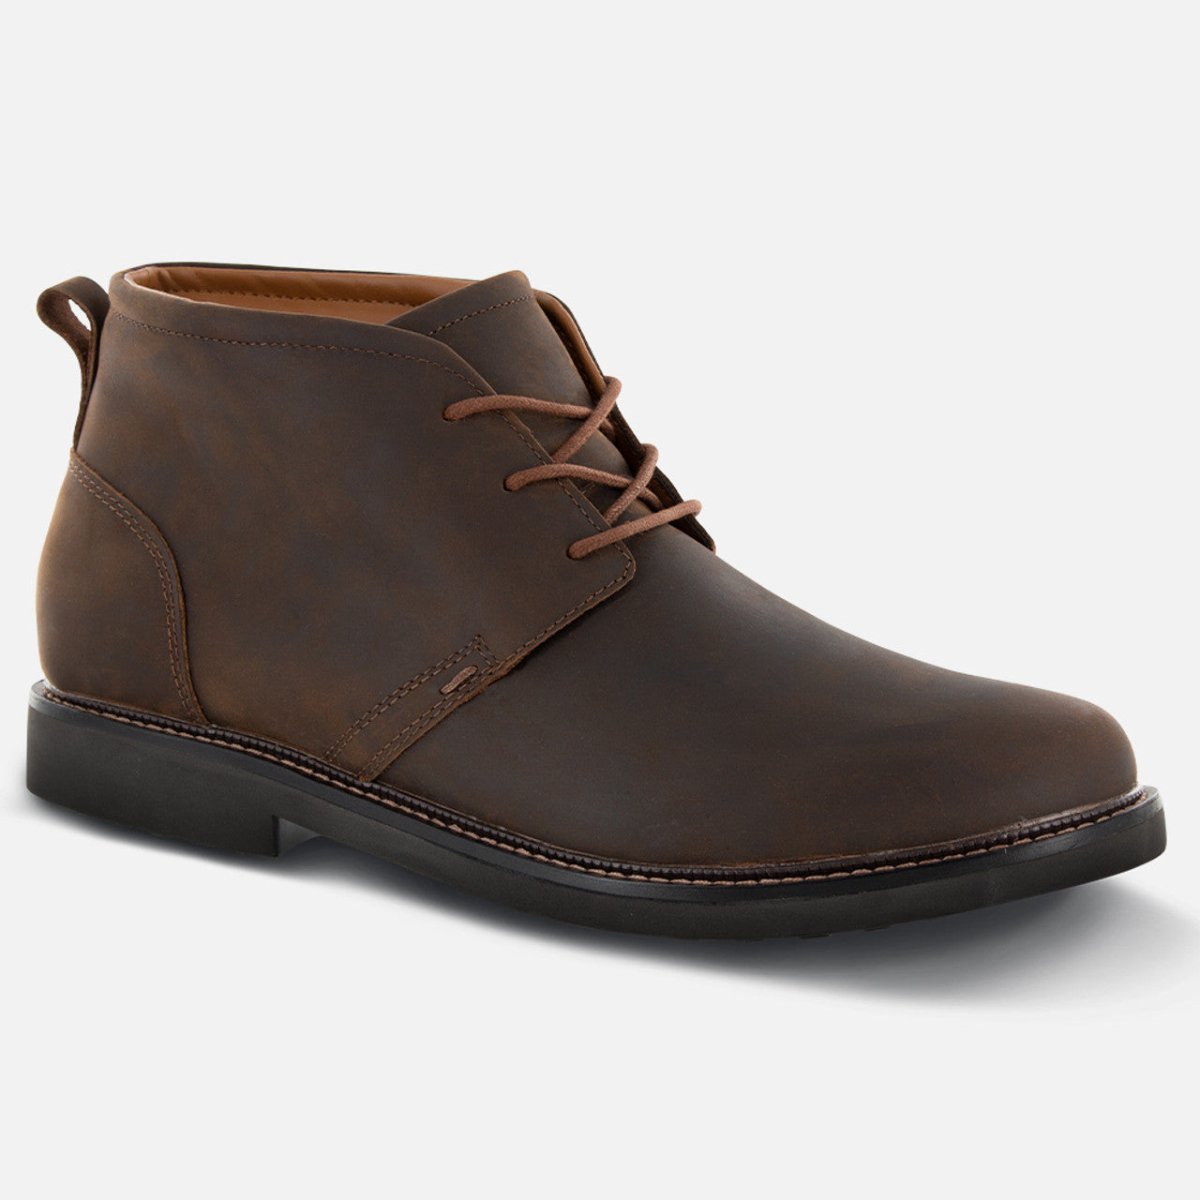 APEX LT410M HUDSON CHUKKA MEN'S BOOT IN BROWN - TLW Shoes